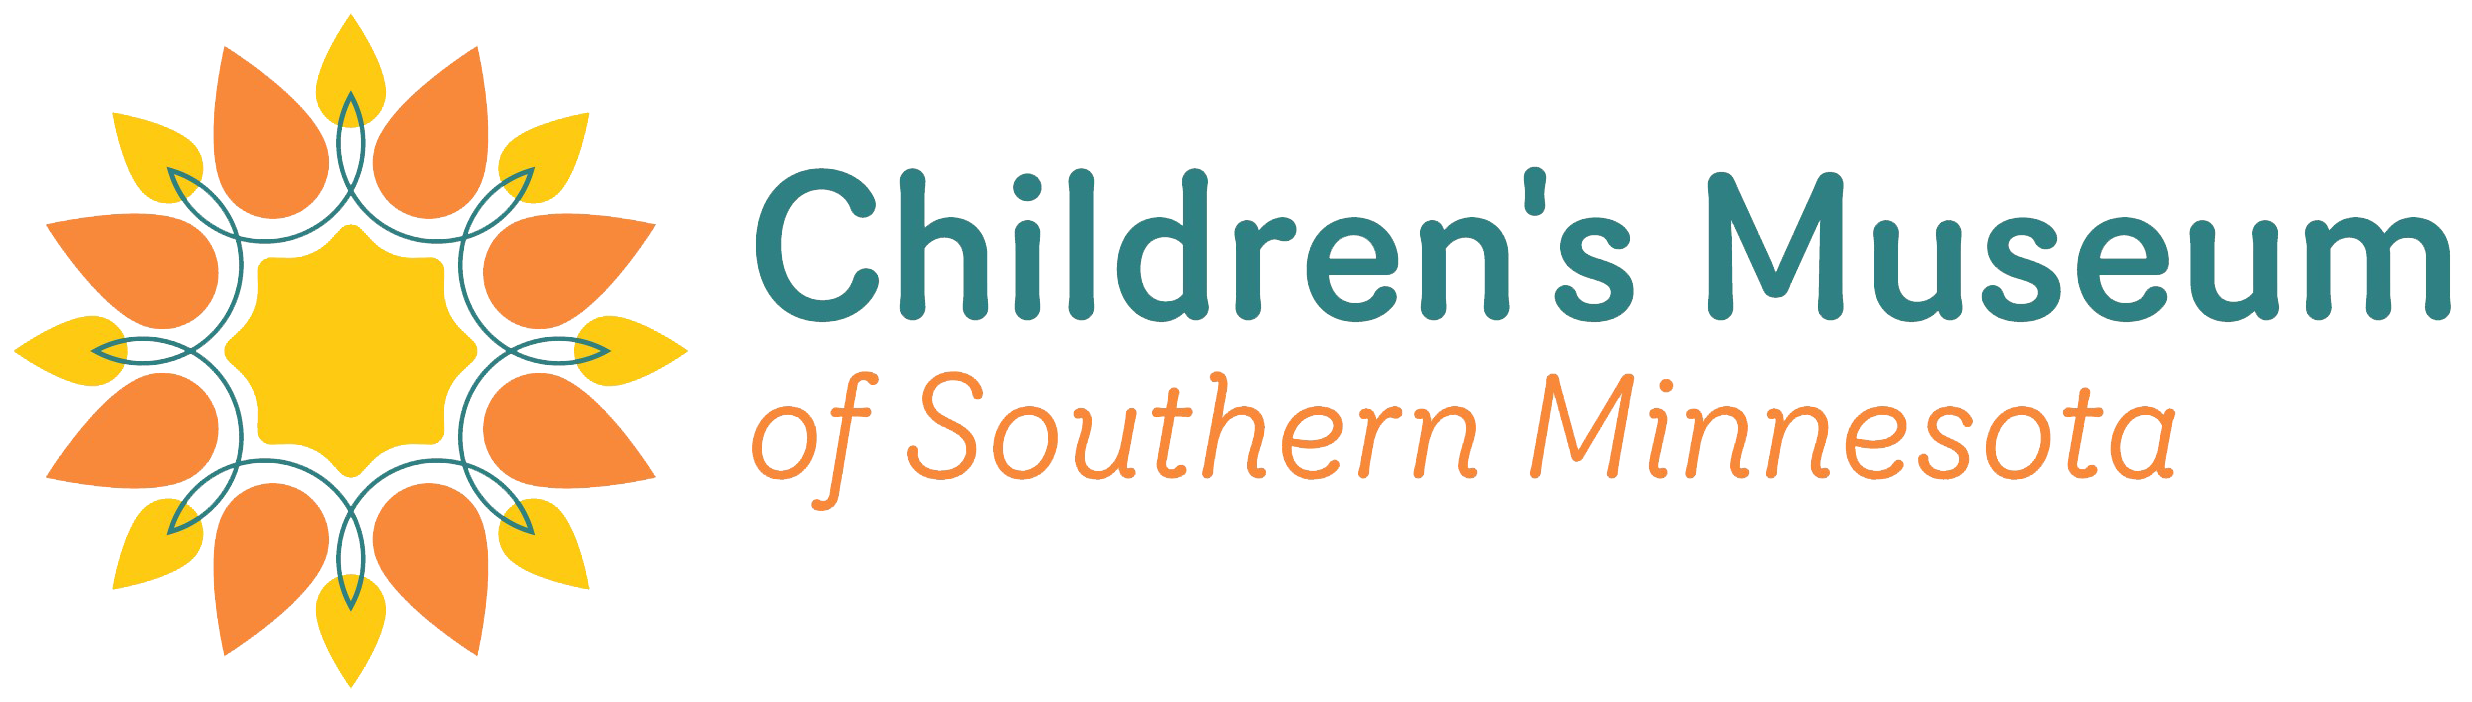 Children's Museum of Southern Minnesota Homepage